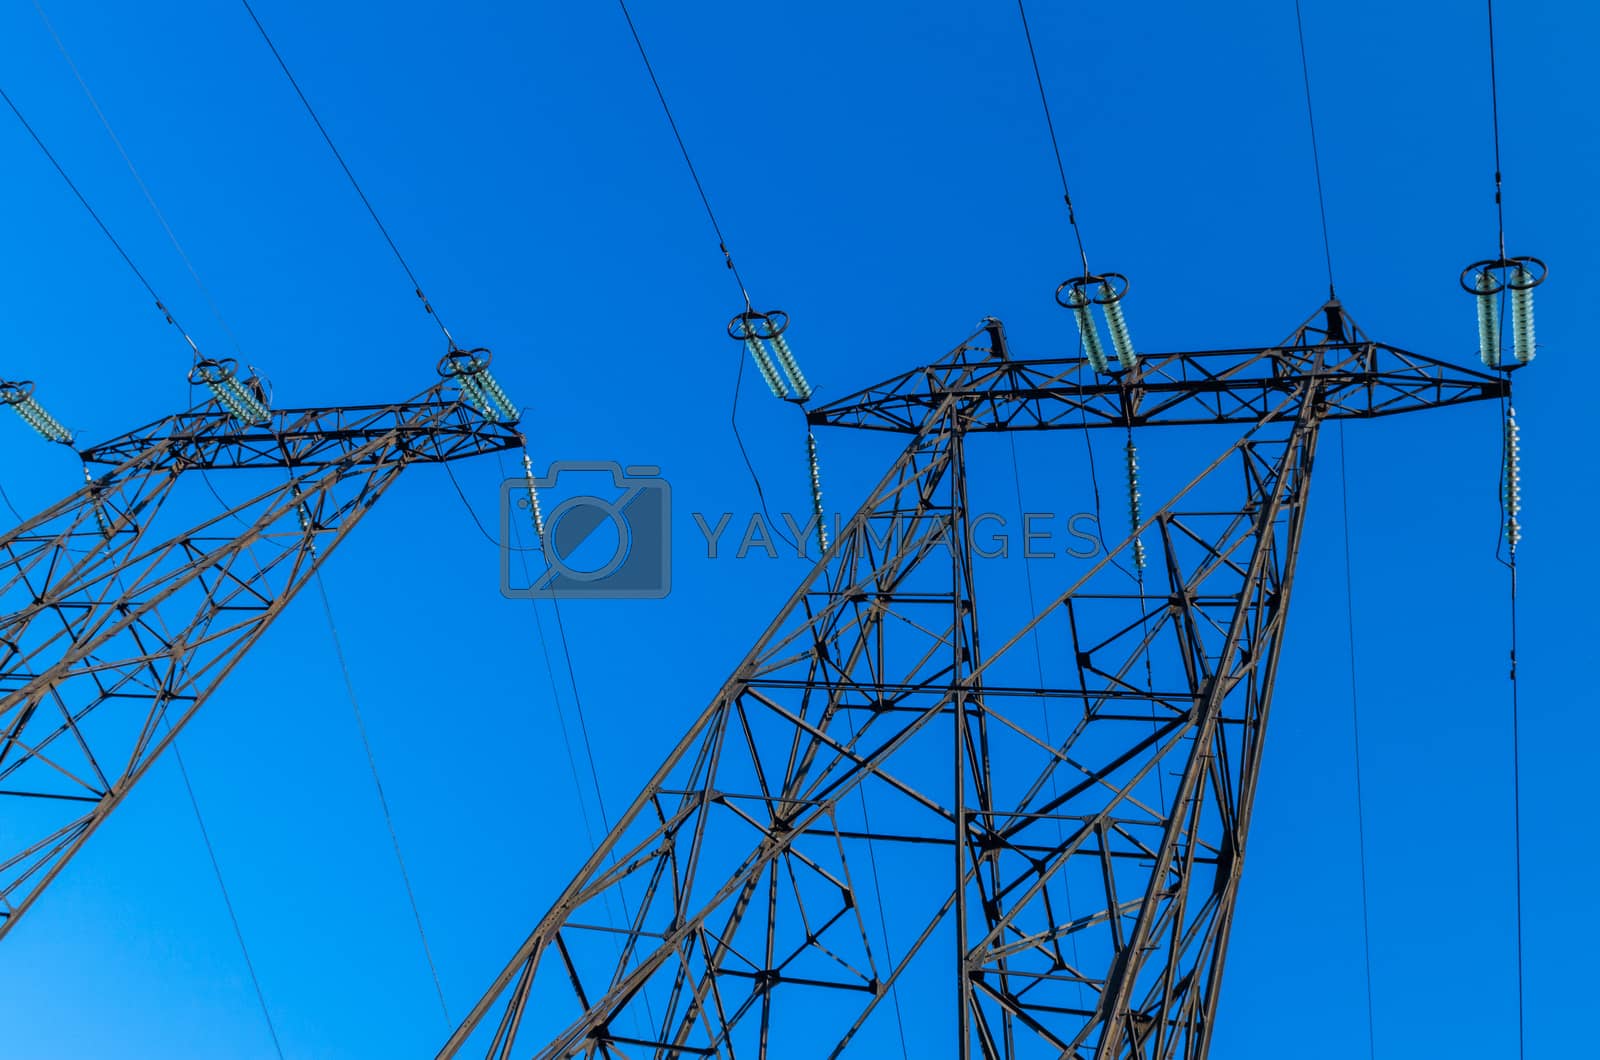 Royalty free image of high-voltage power lines by Andreua